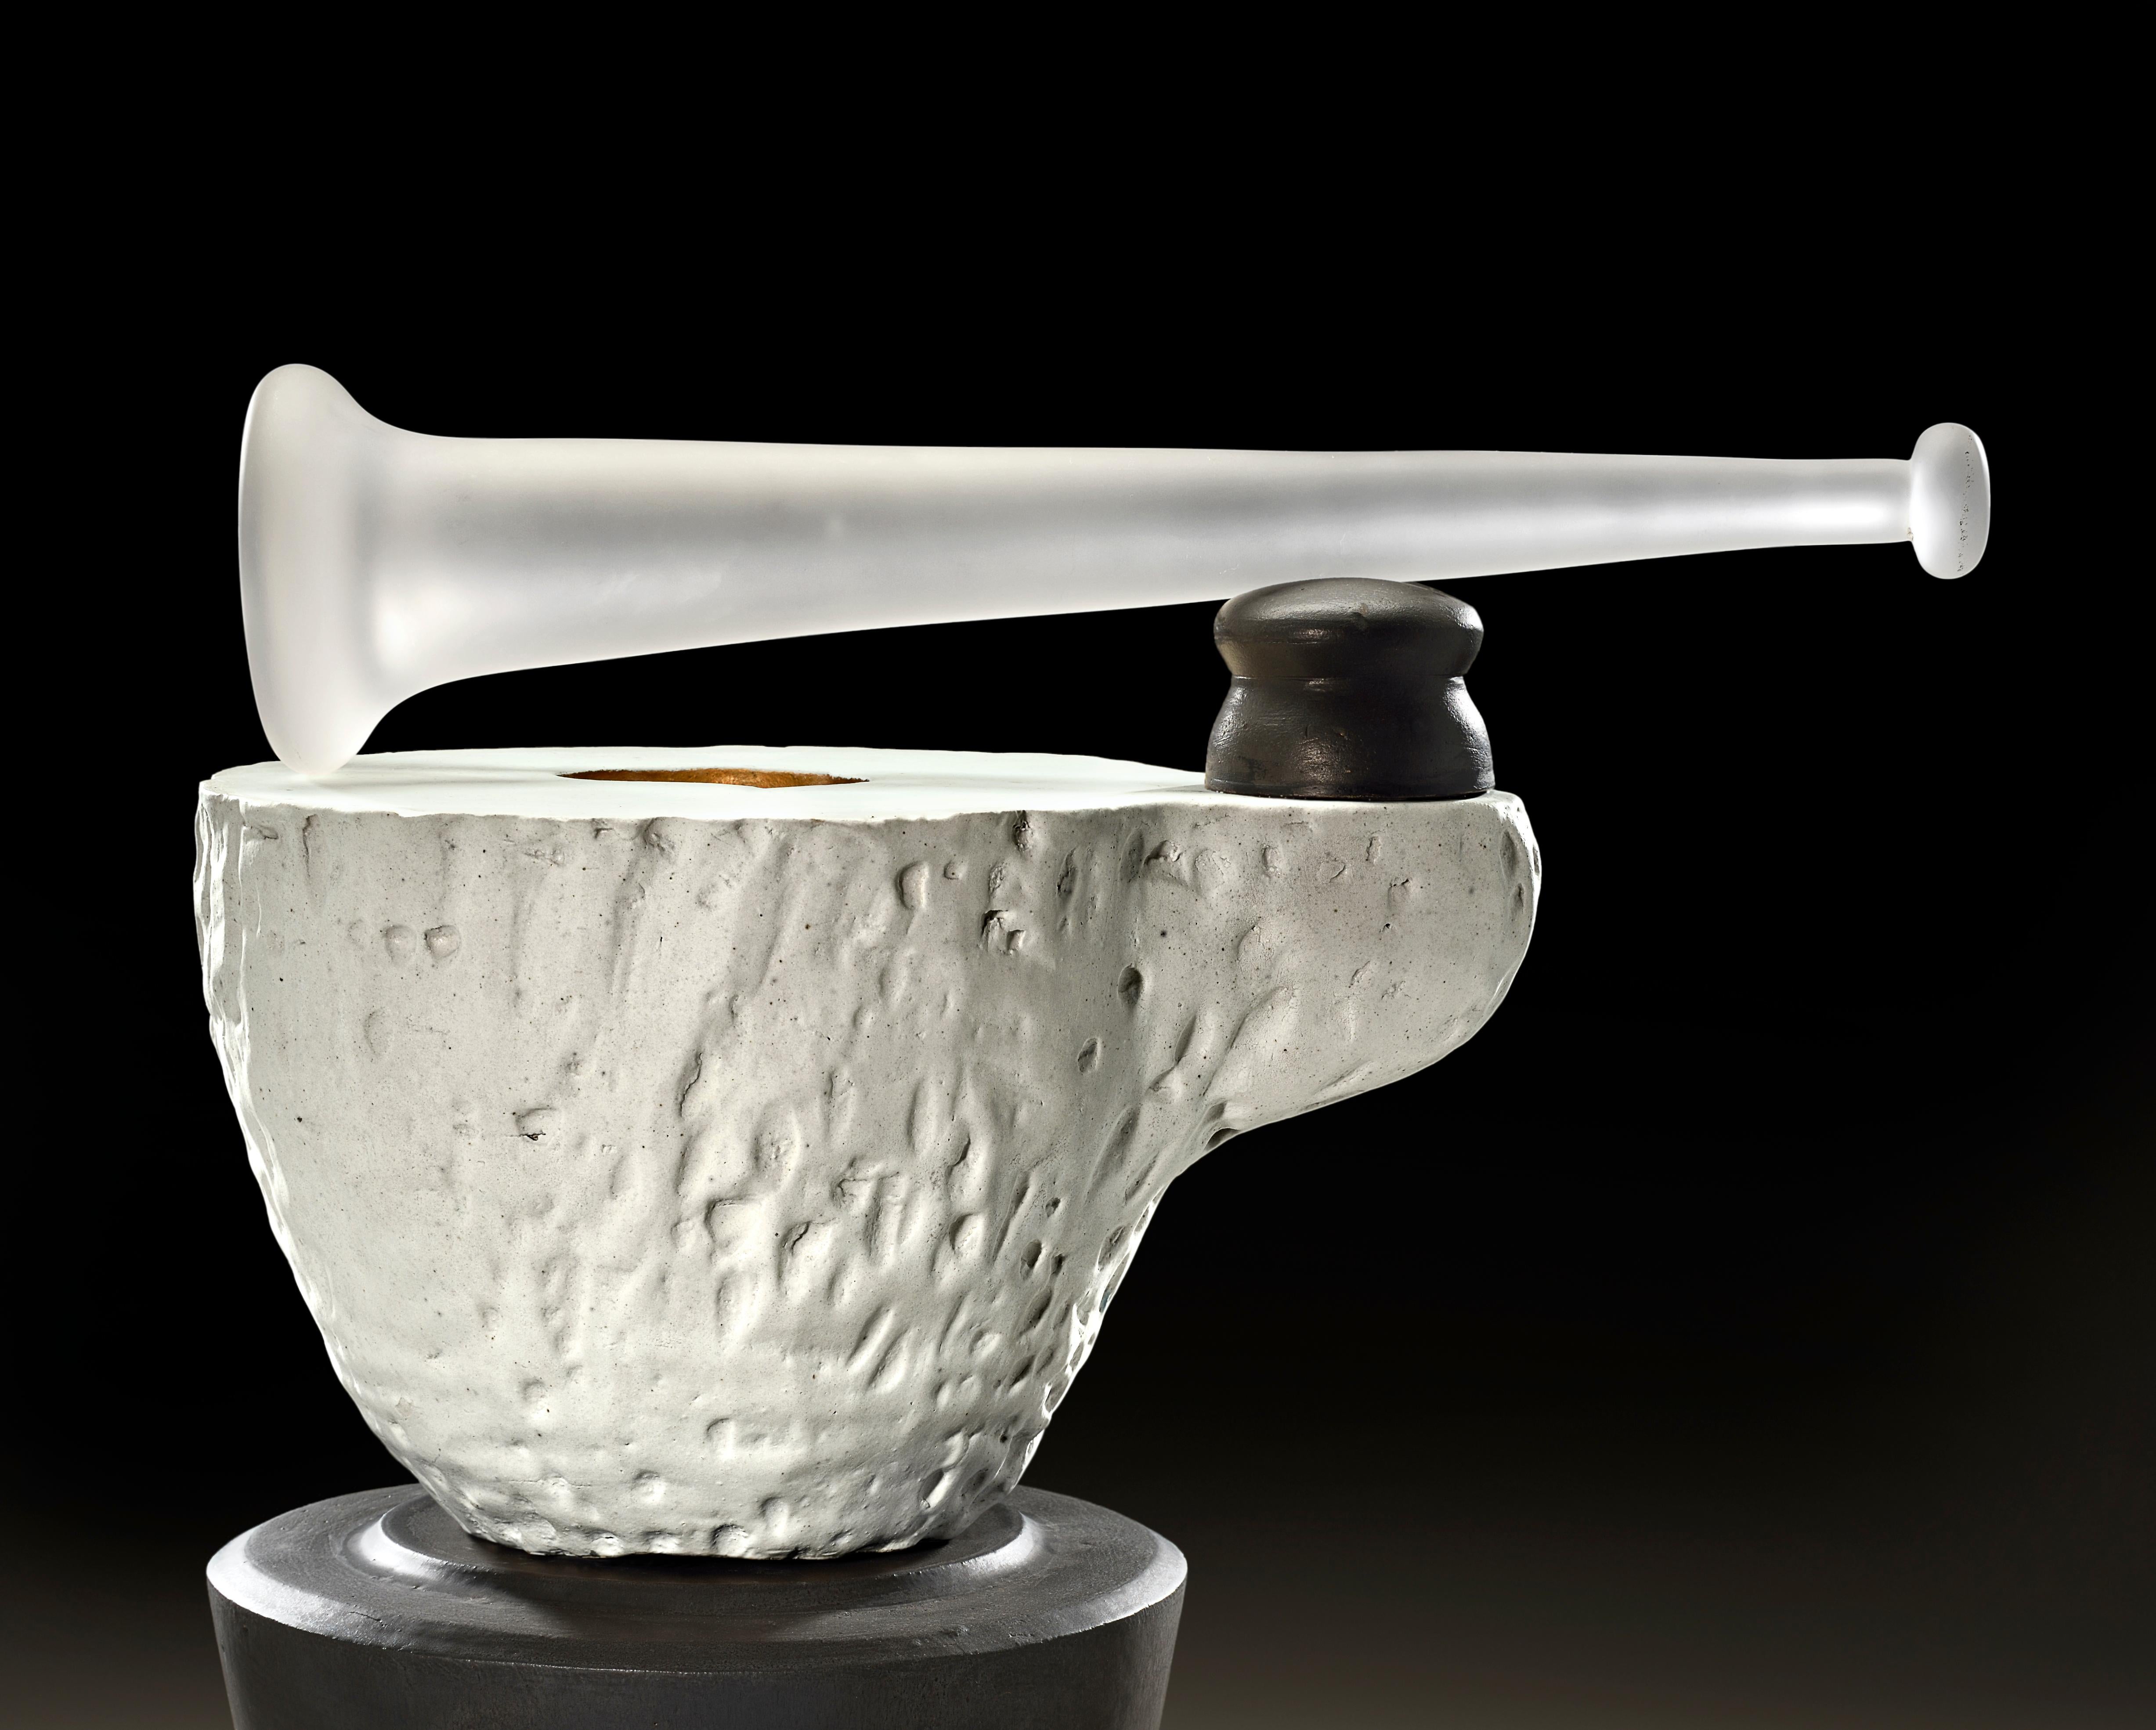 Richard Hirsch Ceramic Mortar and Glass Pestle Sculpture #2, 2020 In Excellent Condition For Sale In New York, NY